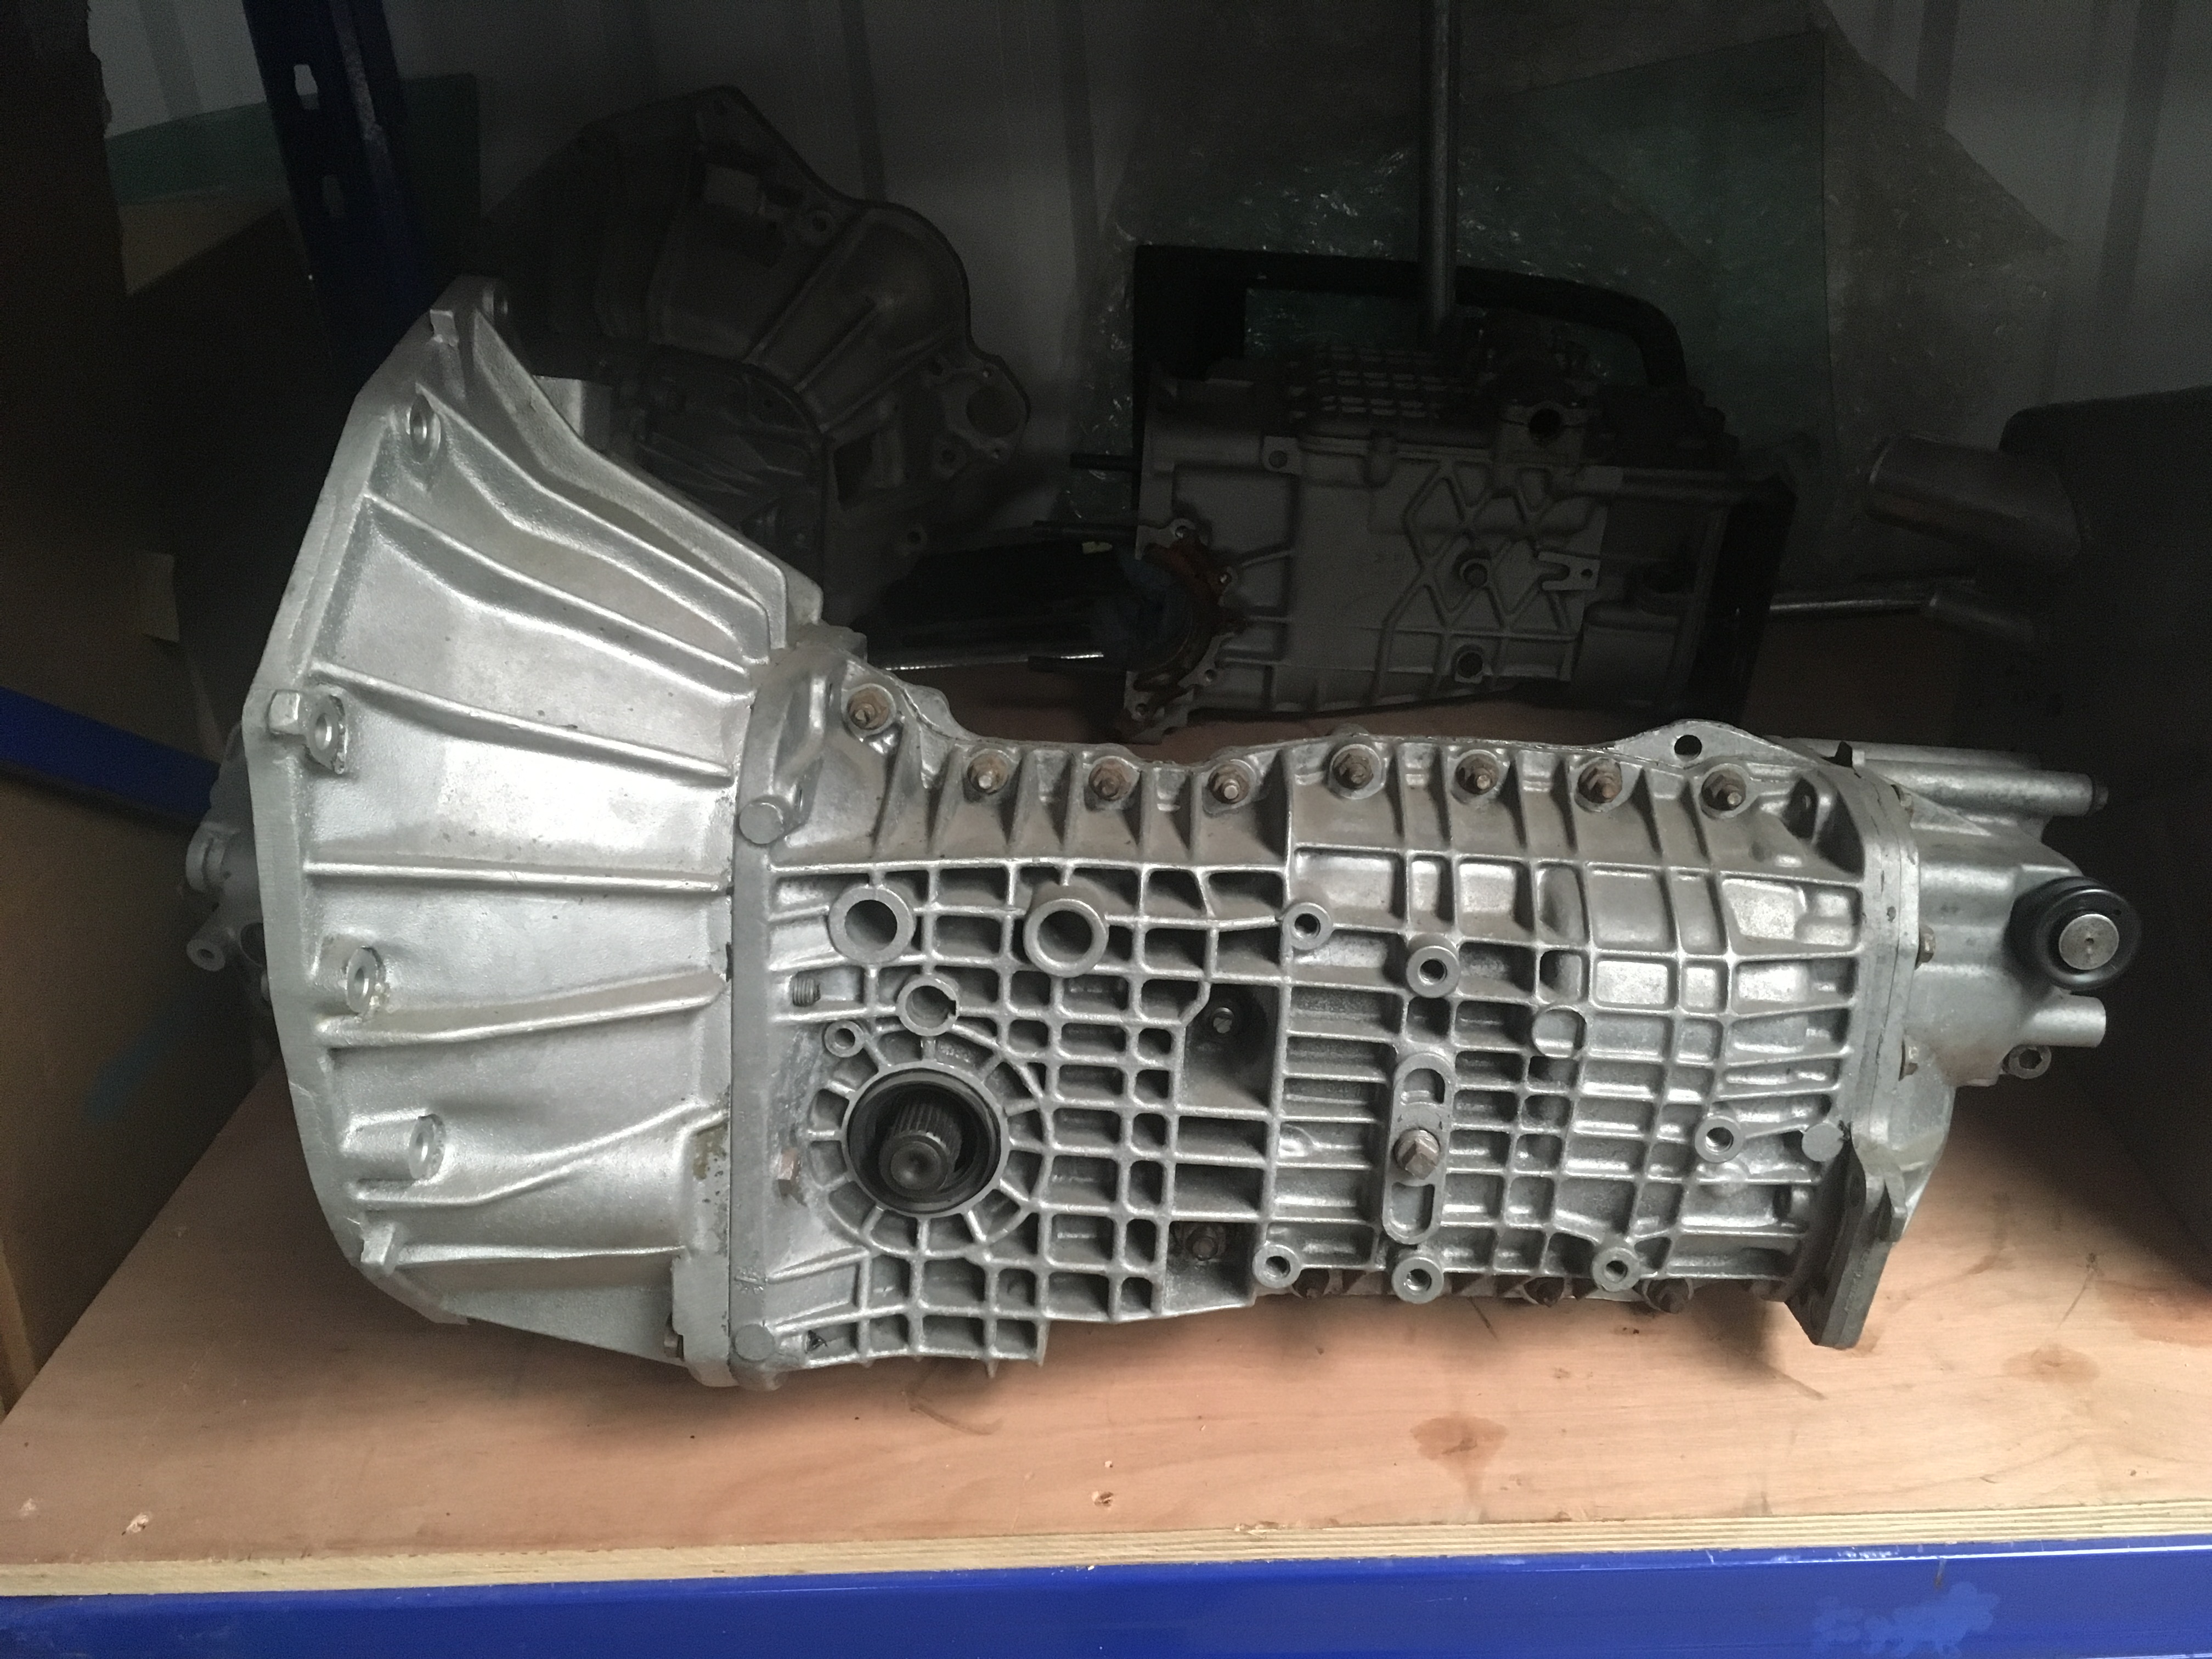 Lotus Esprit Renault UN1 Gearbox finished and ready for stock at Esprit Engineering - Gearbox Rebuilding Service - V8 S4S S4 SE X180